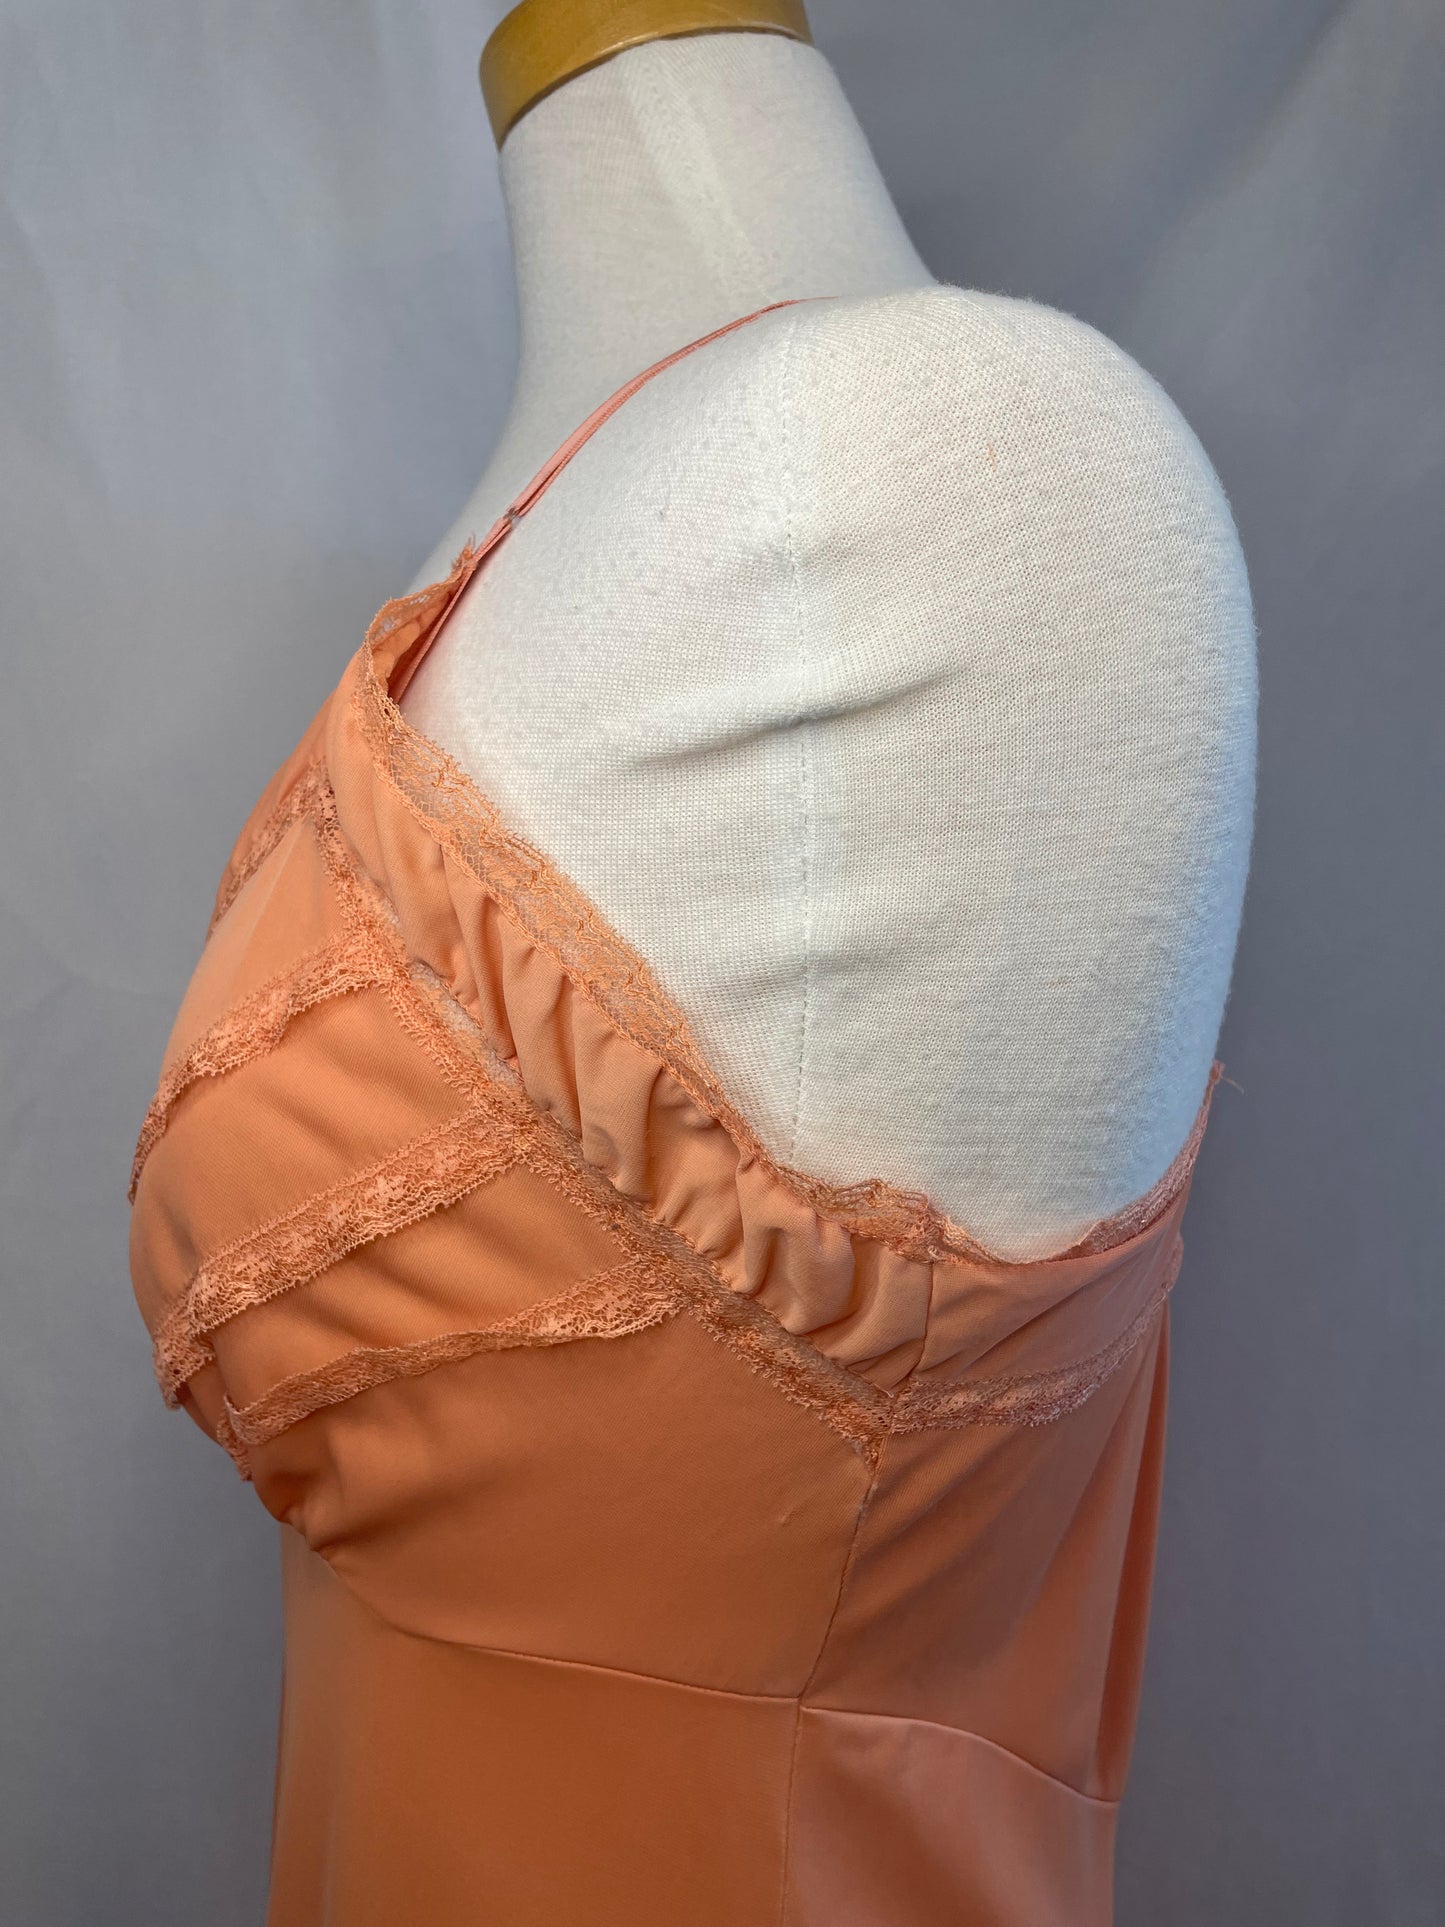 *RARE* Luxite by Holeproof Vintage 1940s/50s Peachy Lingerie